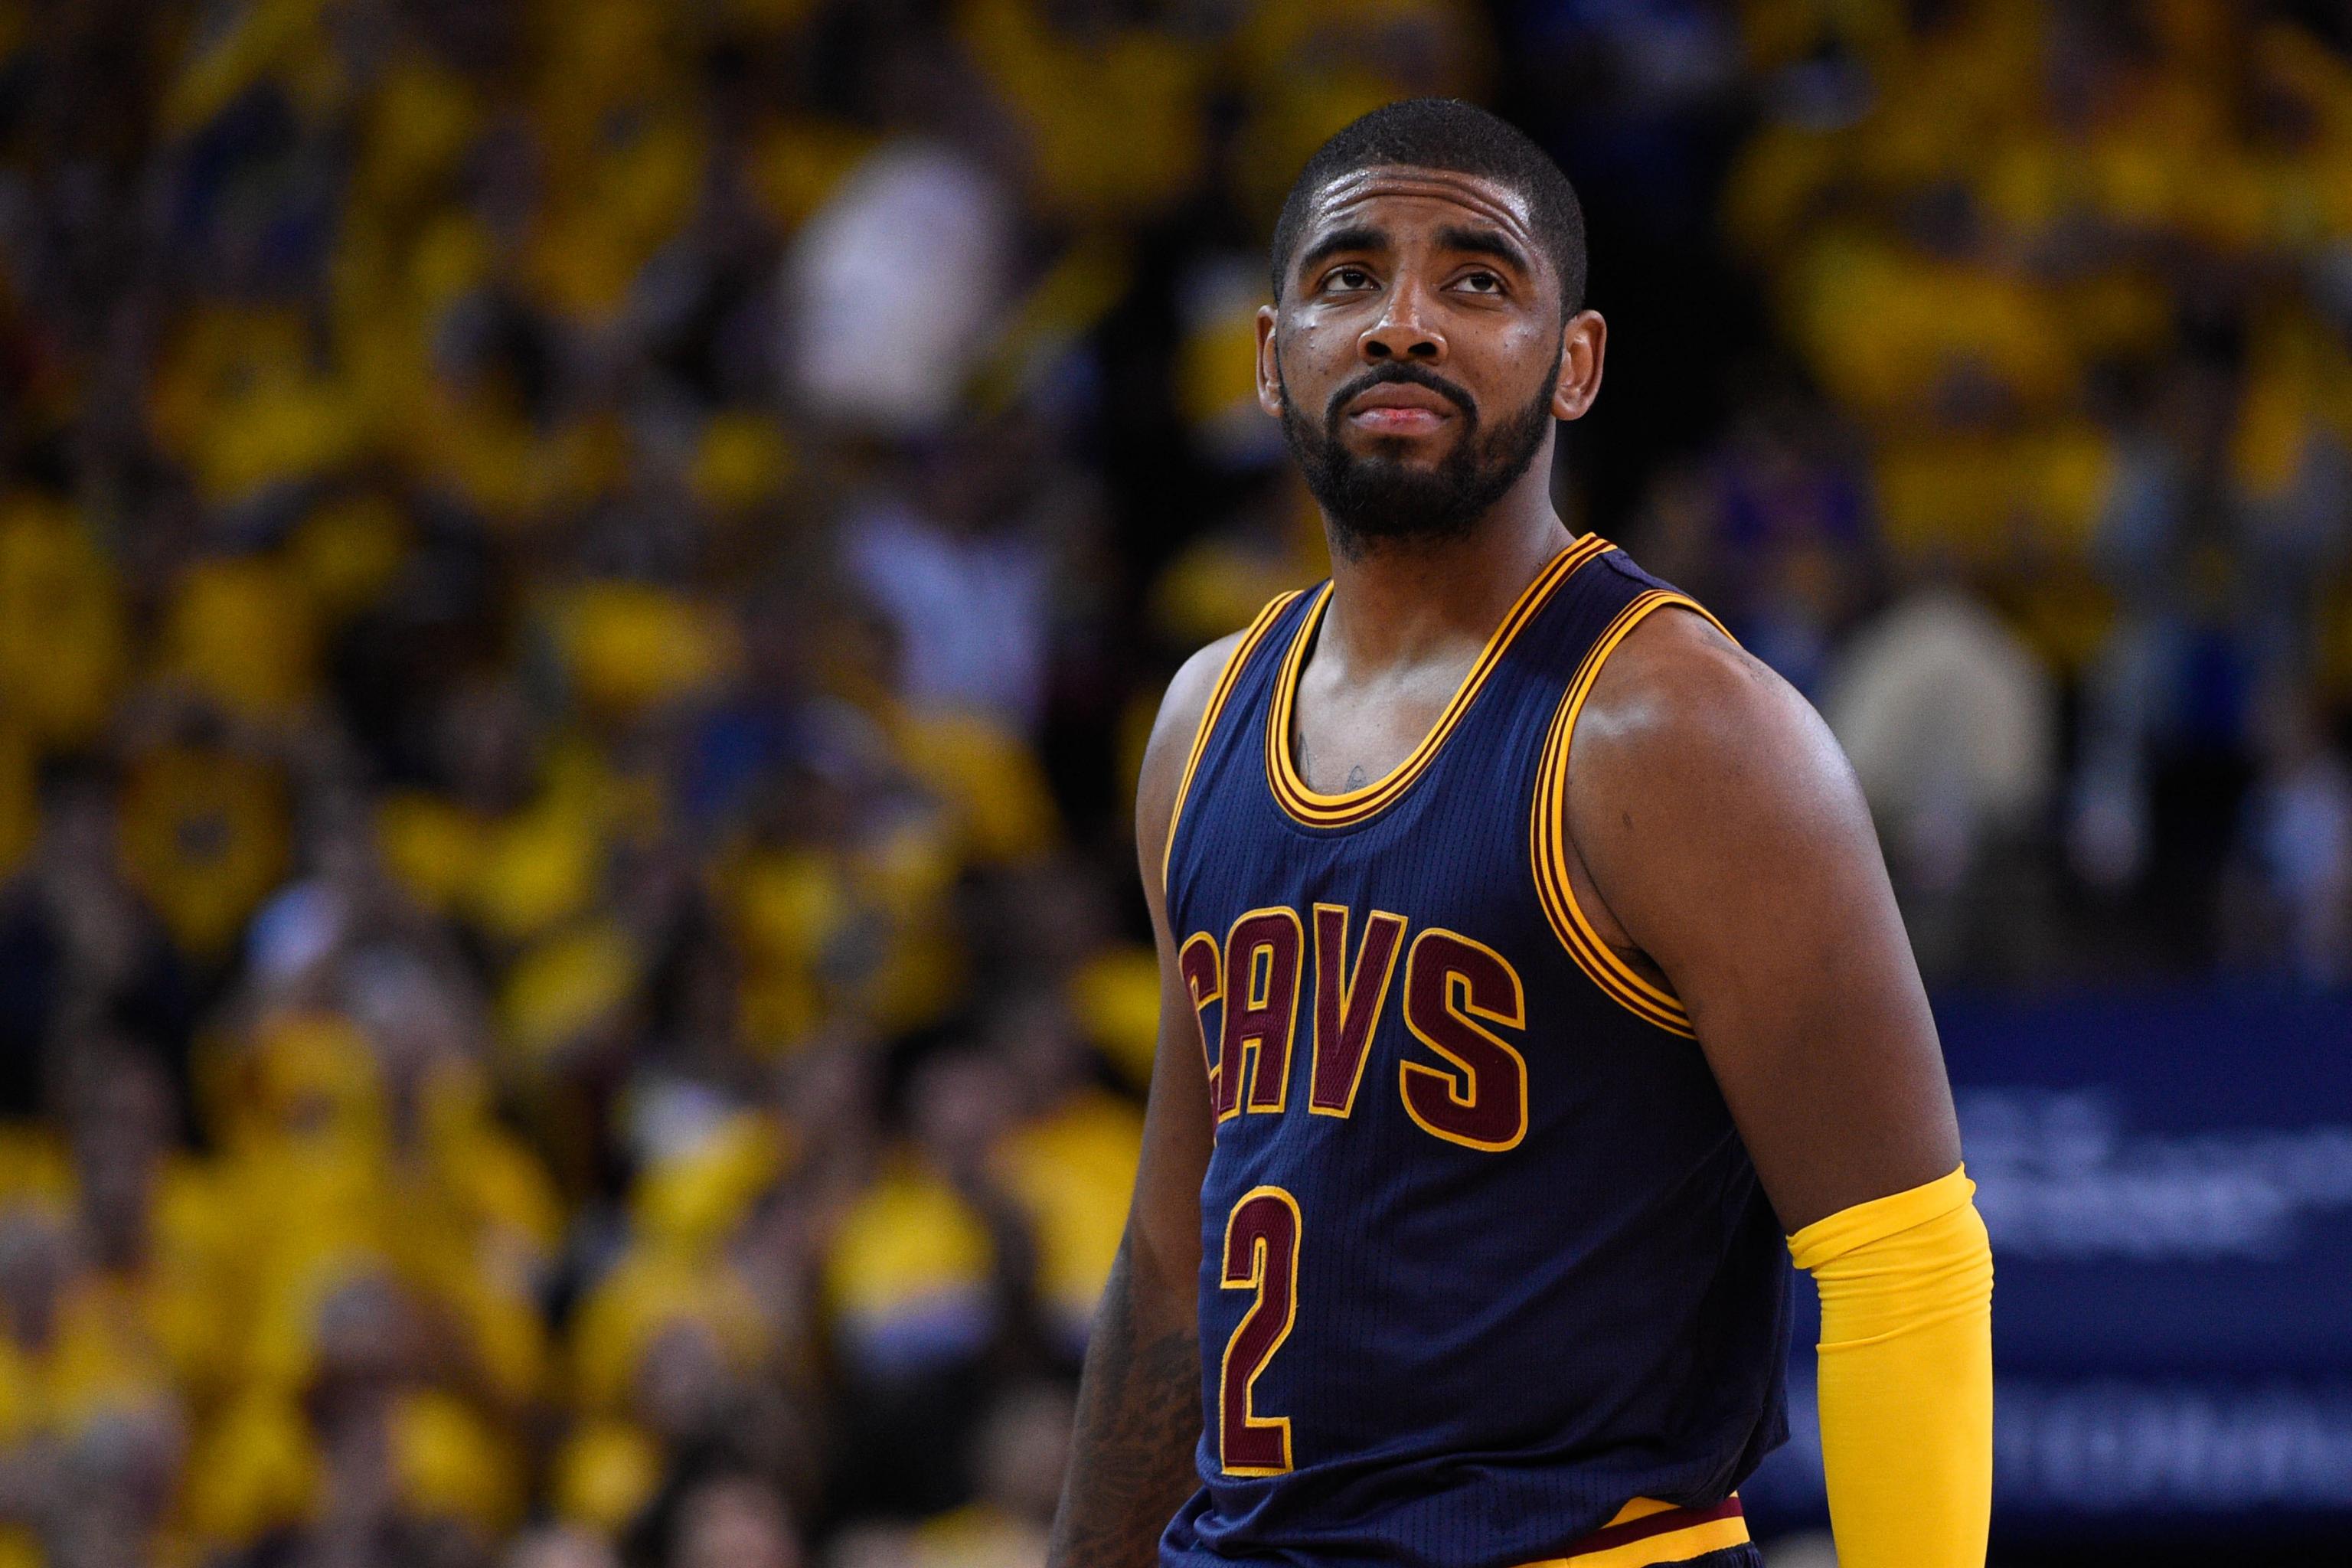 Top pick Kyrie Irving introduced by Cavs